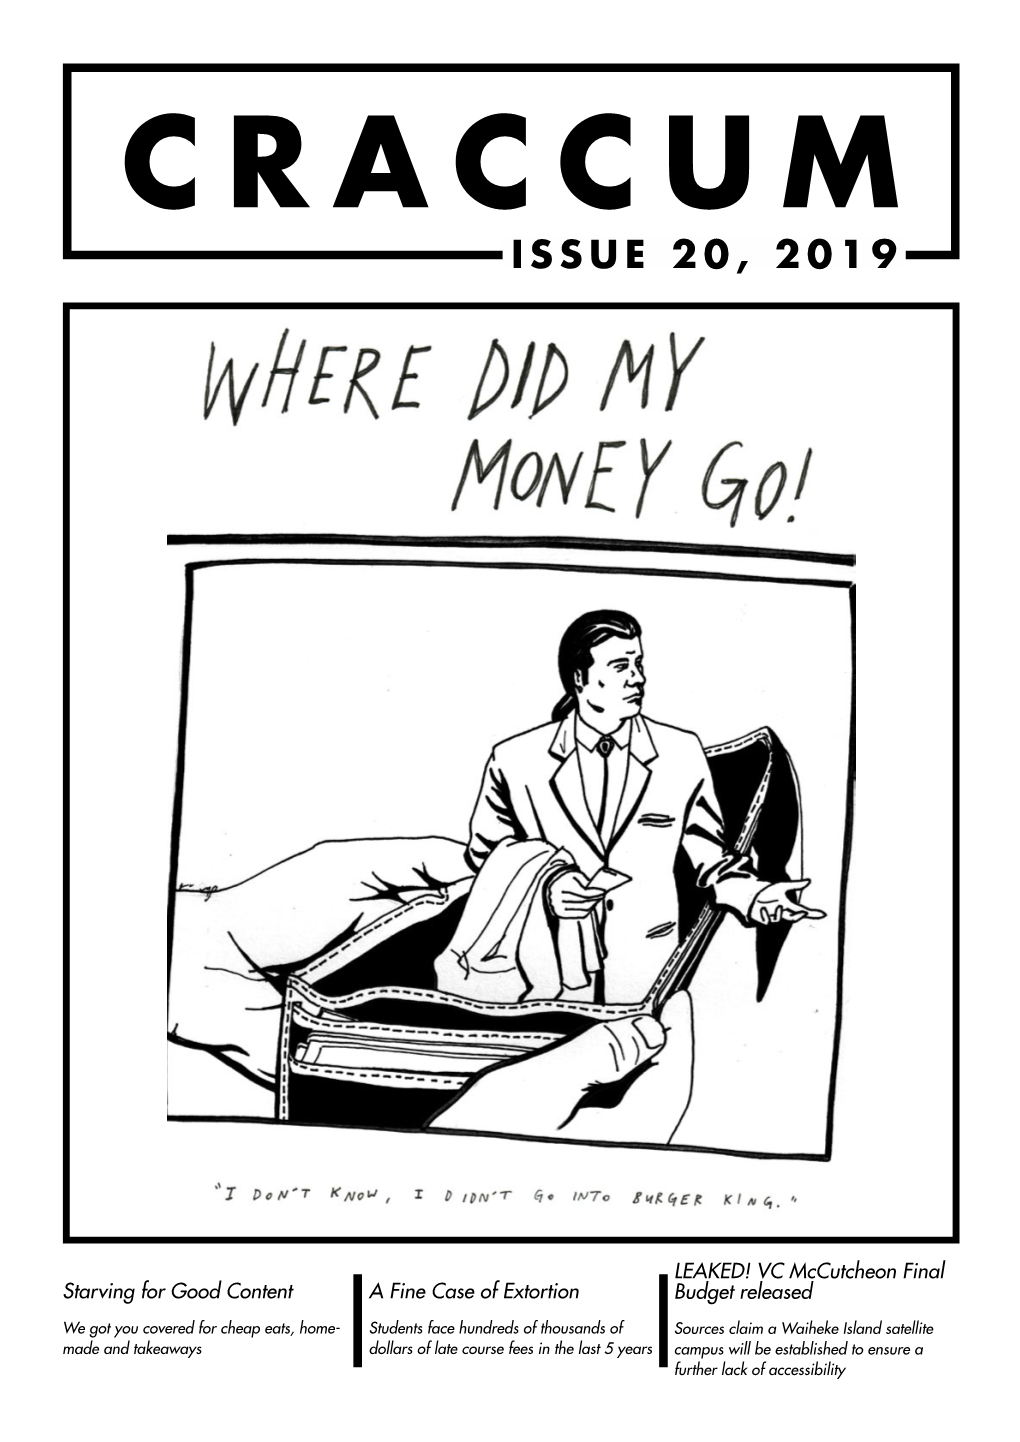 Issue 20, 2019